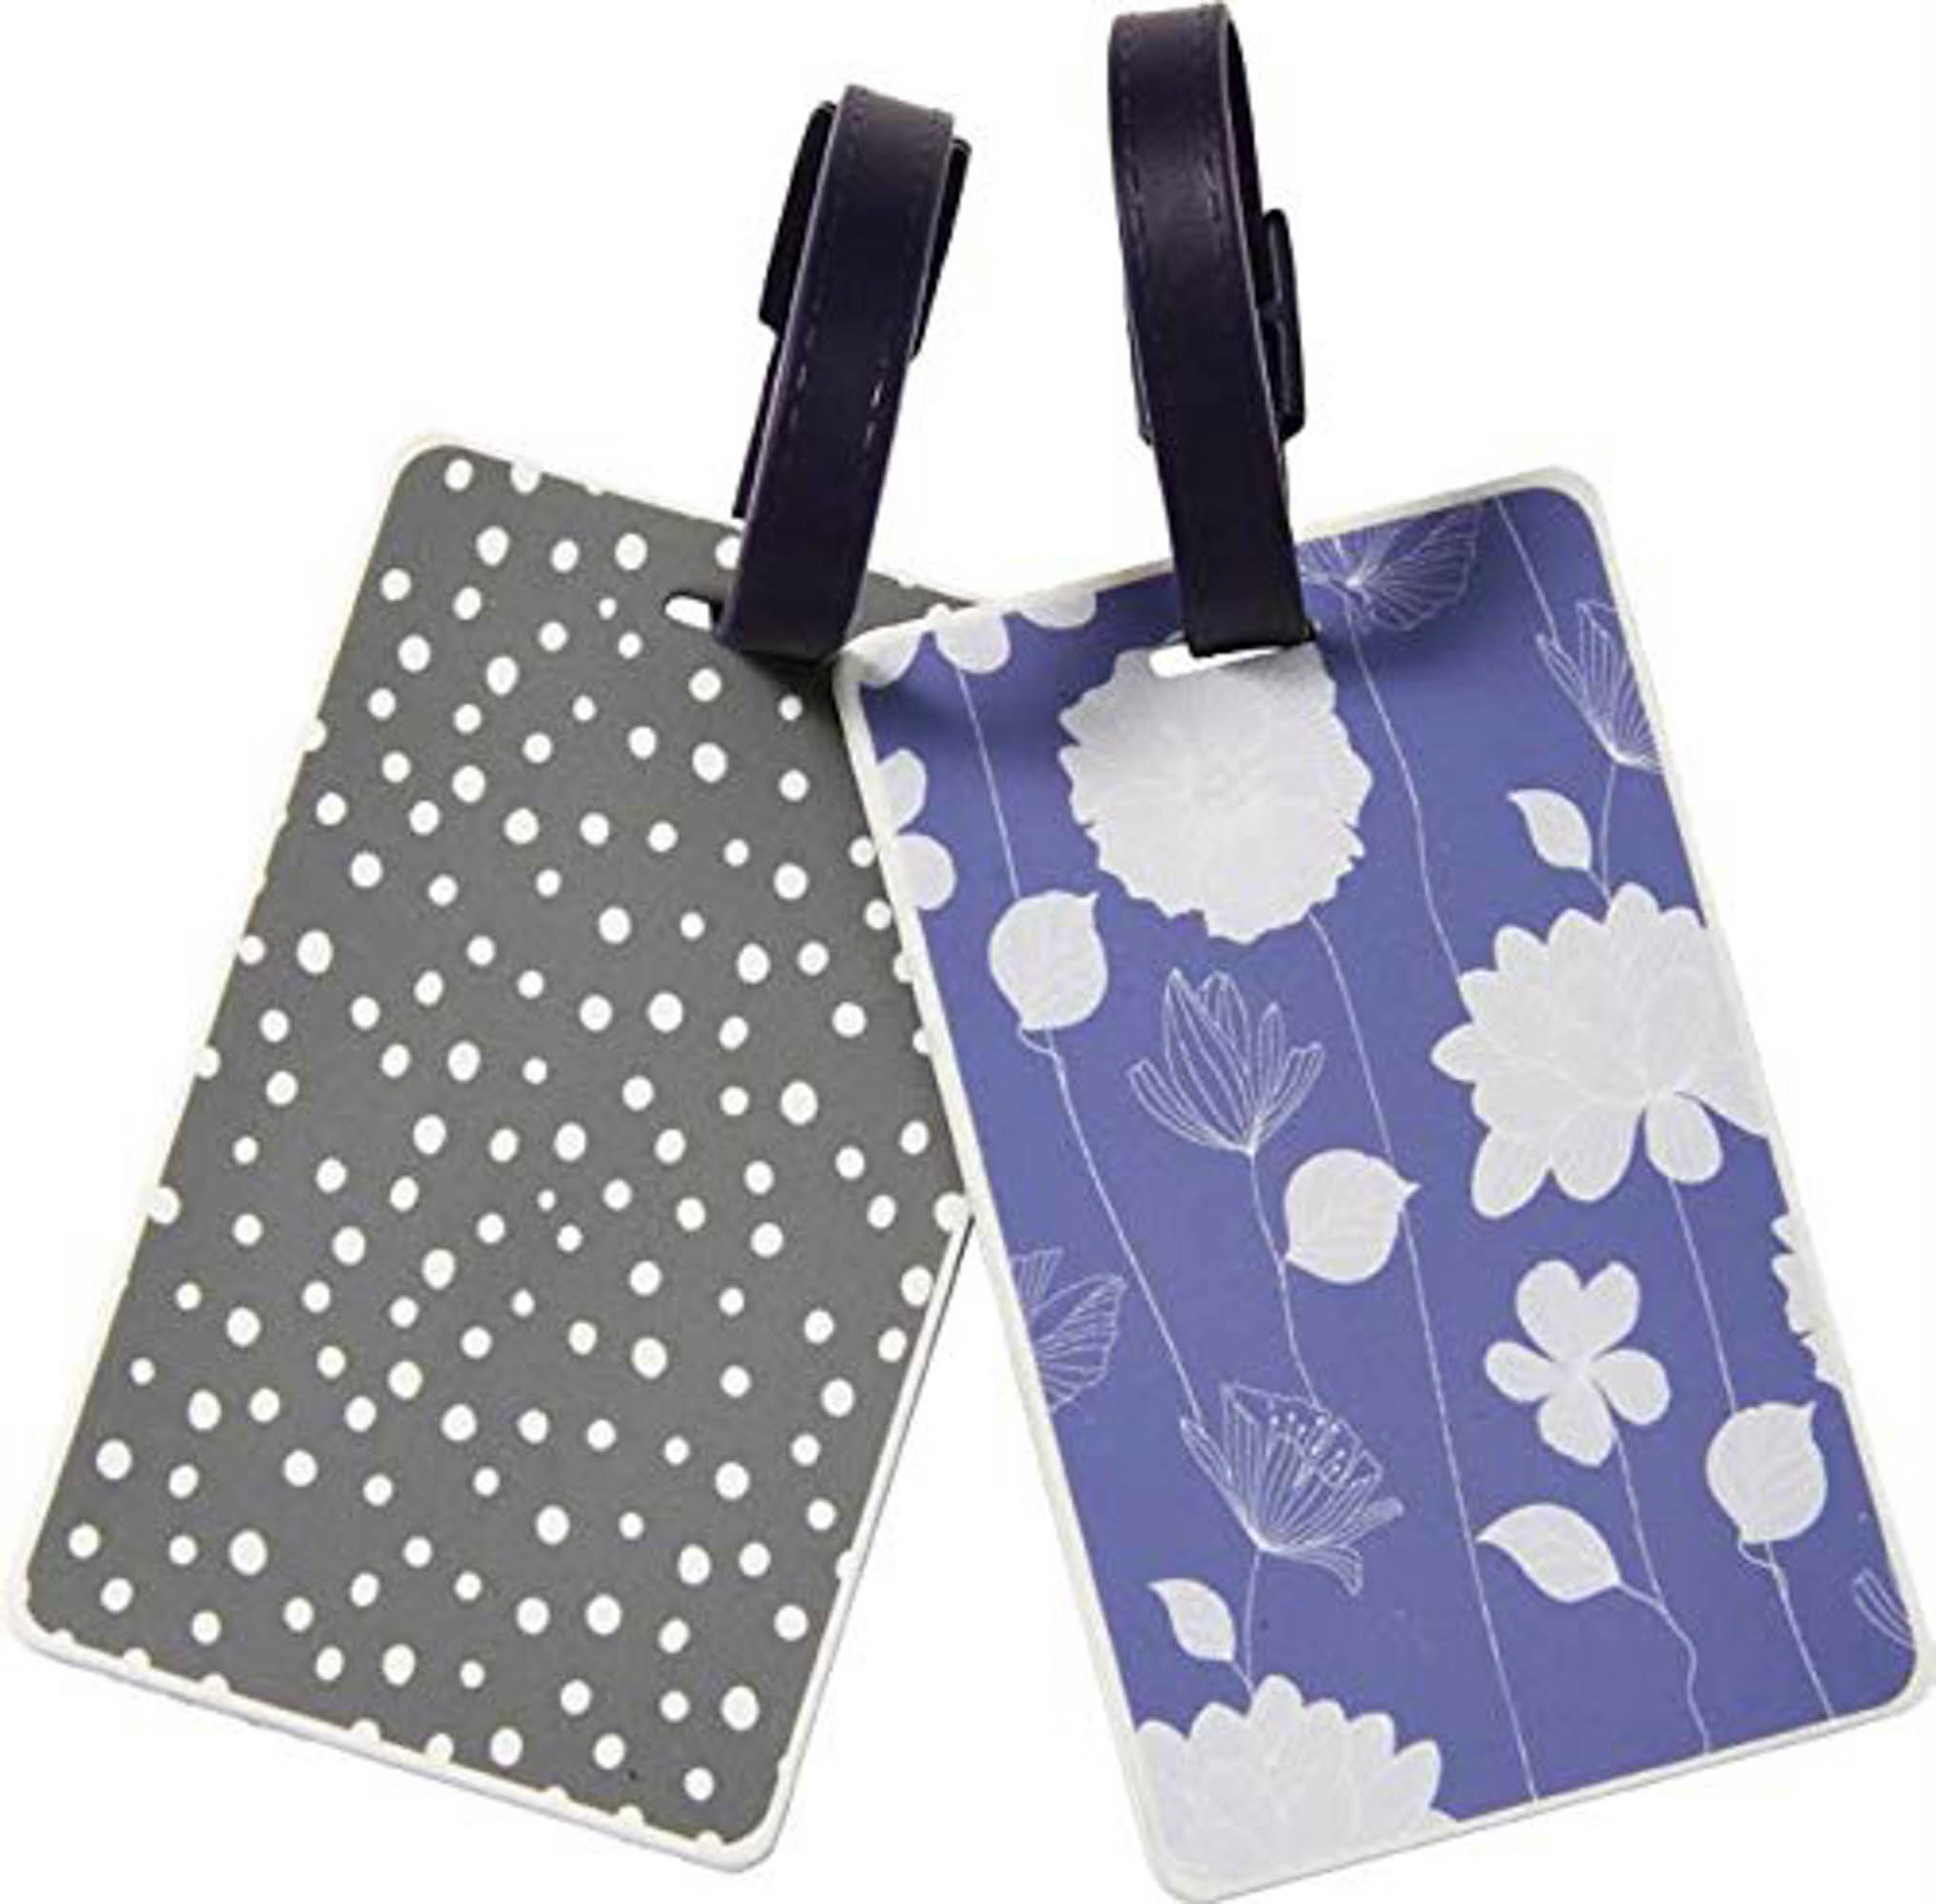 Sailboats Handbag Tag For Suitcase Bag Accessories 2 Pack Luggage Tags